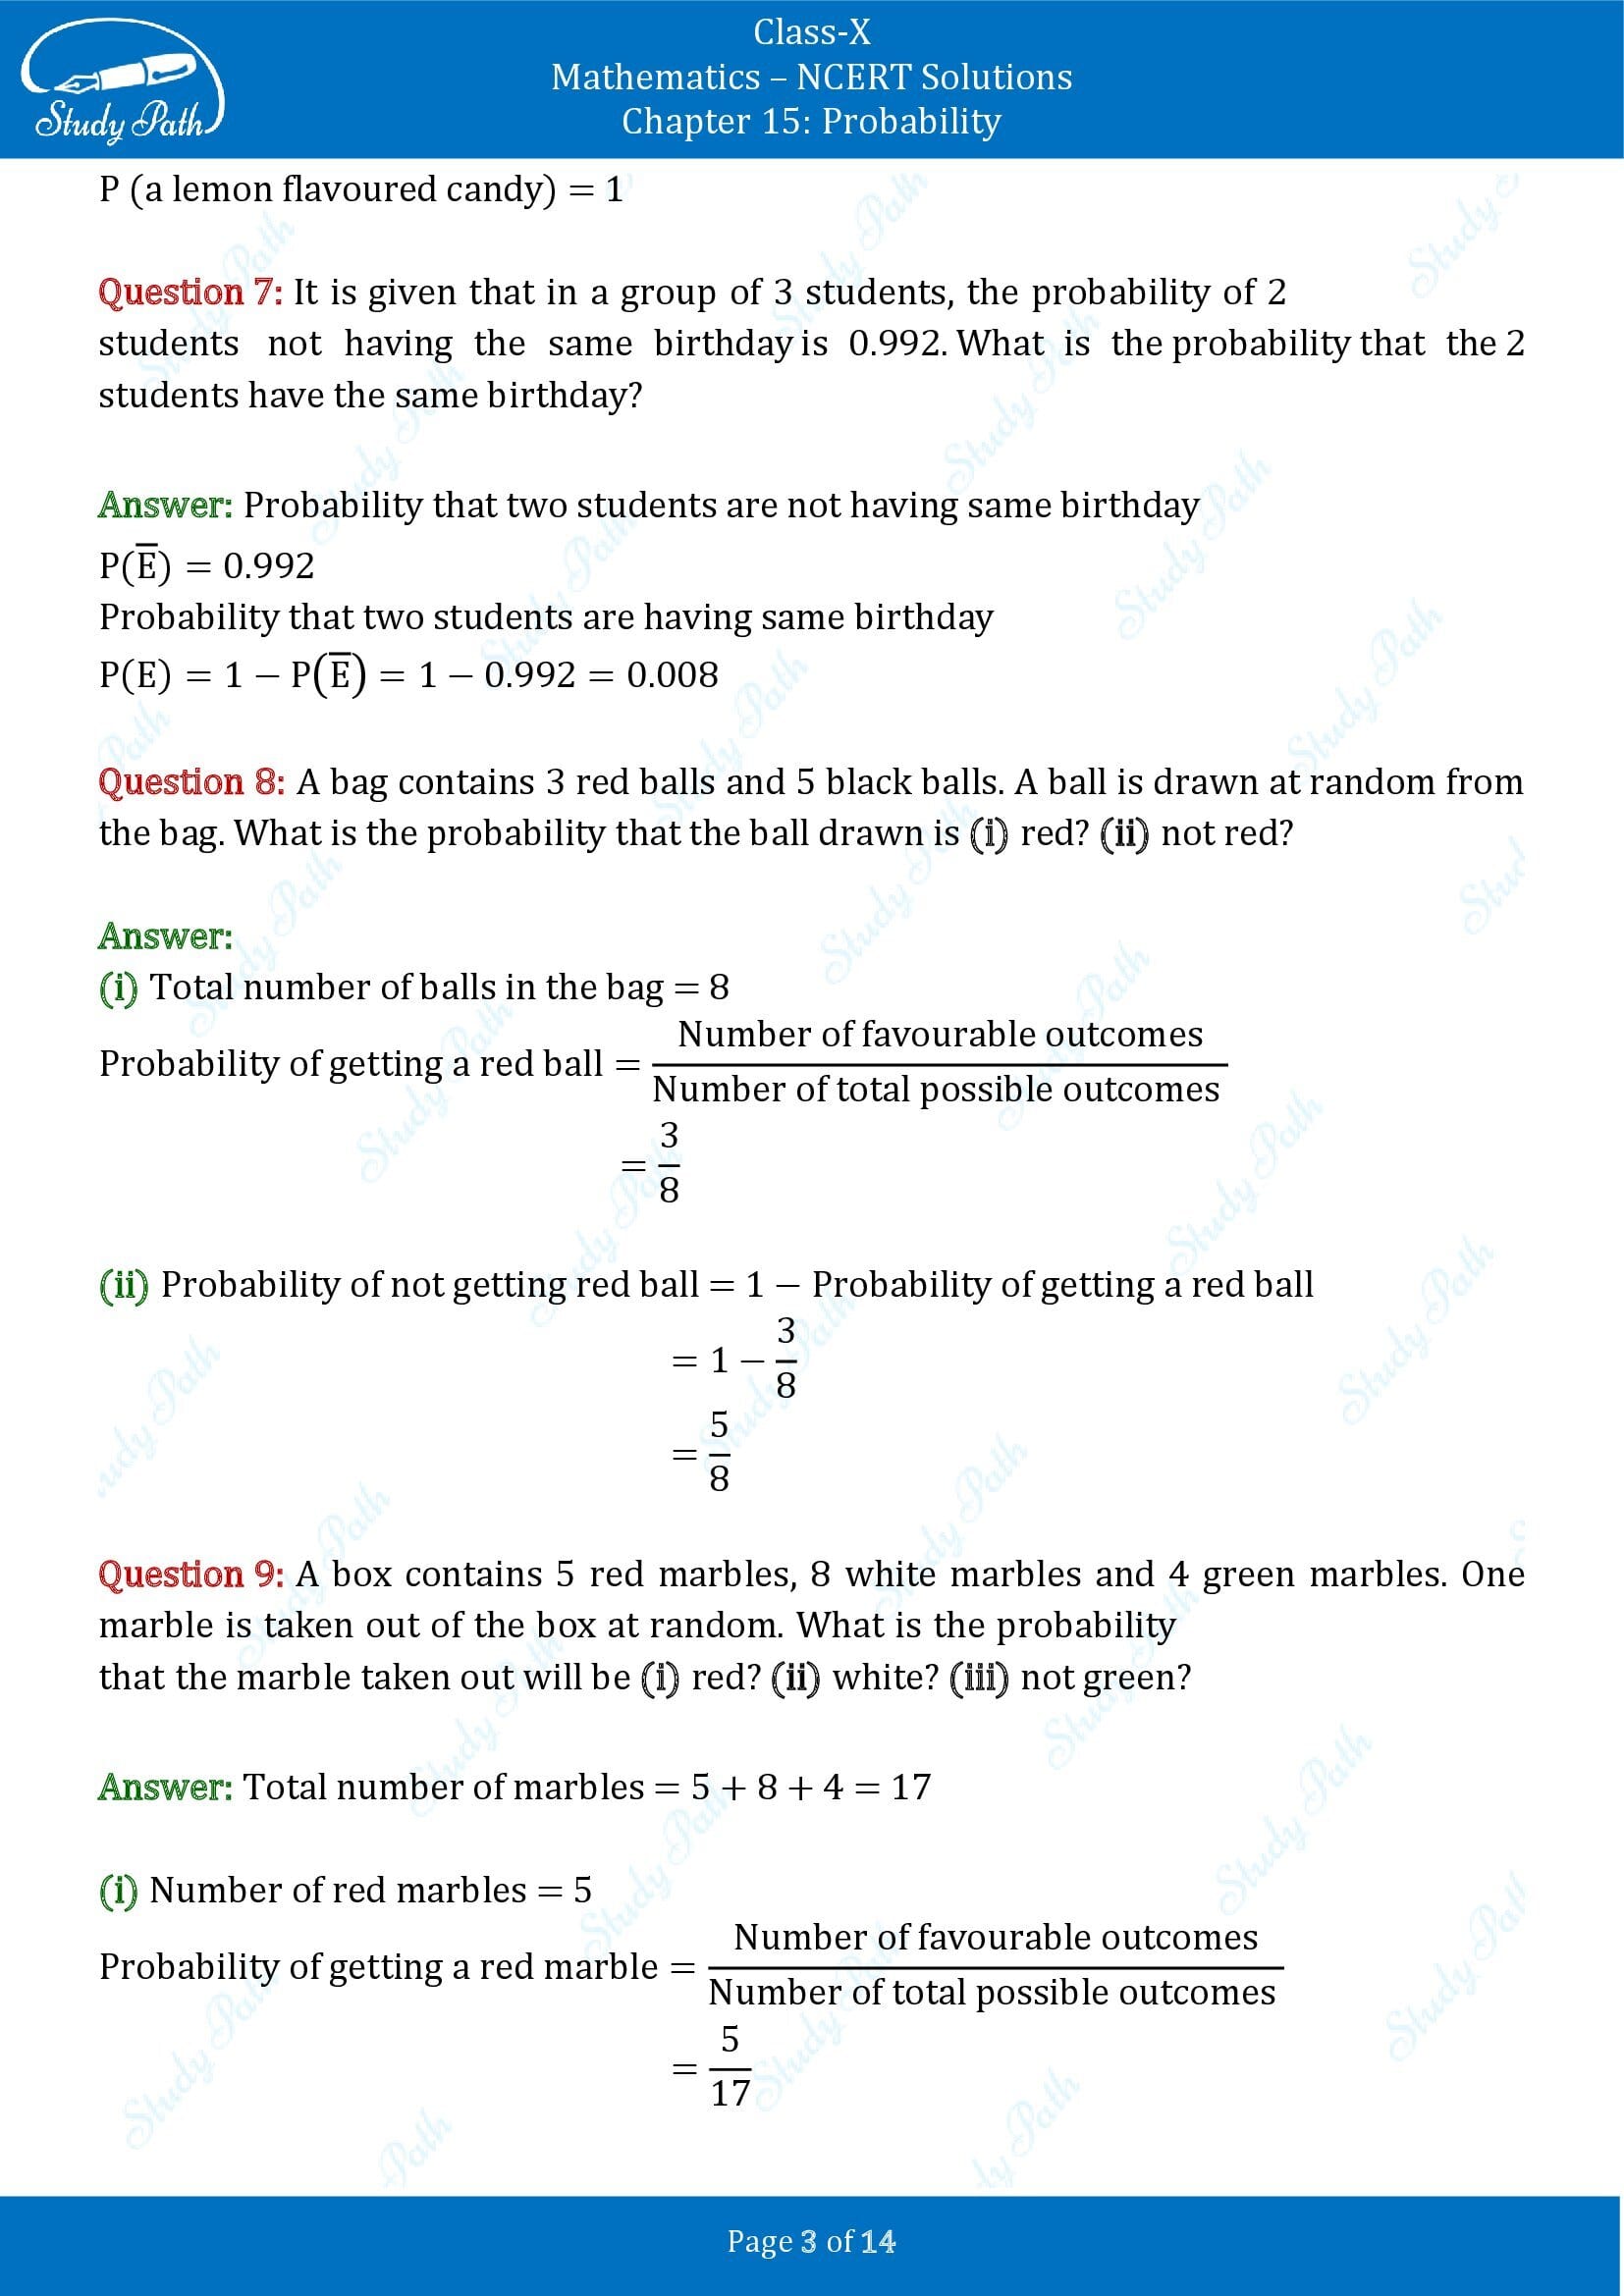 NCERT Solutions for Class 10 Maths Chapter 15 Probability Exercise 15.1 00003